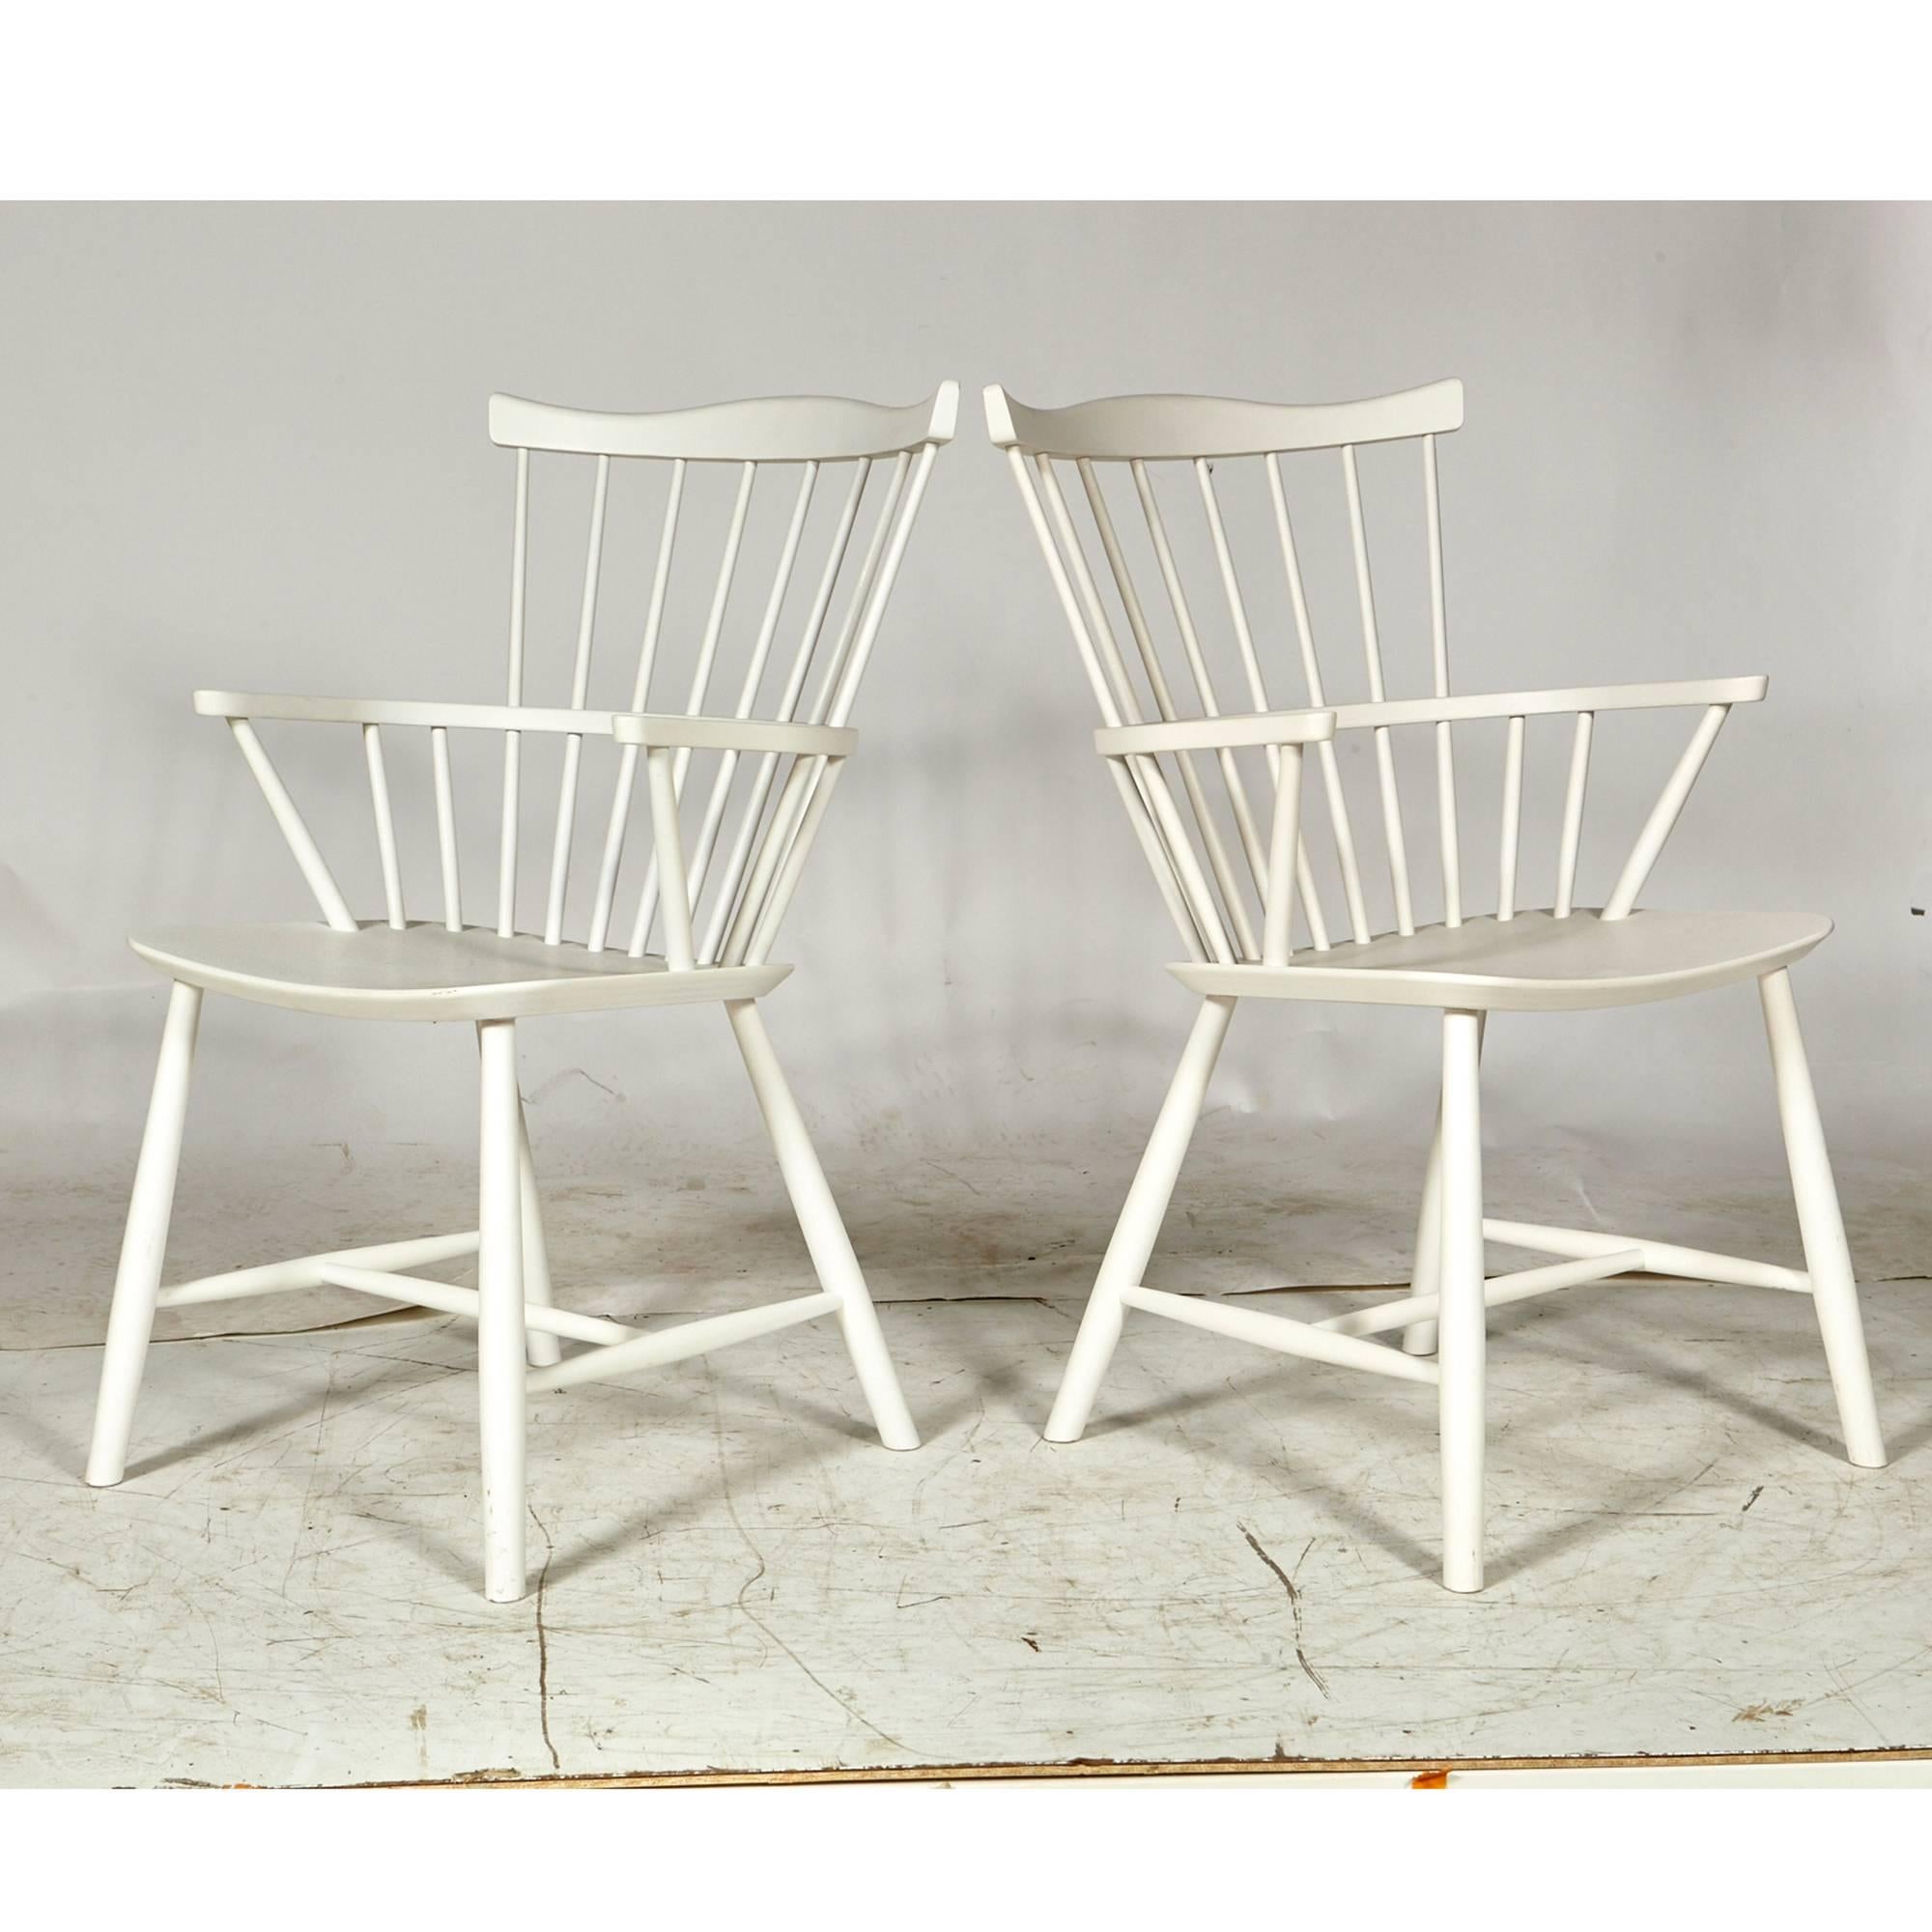 Børge Mogensen Pair of white Windsor armchairs by FDB Møbler, Denmark. Measures: Arms, 25.5